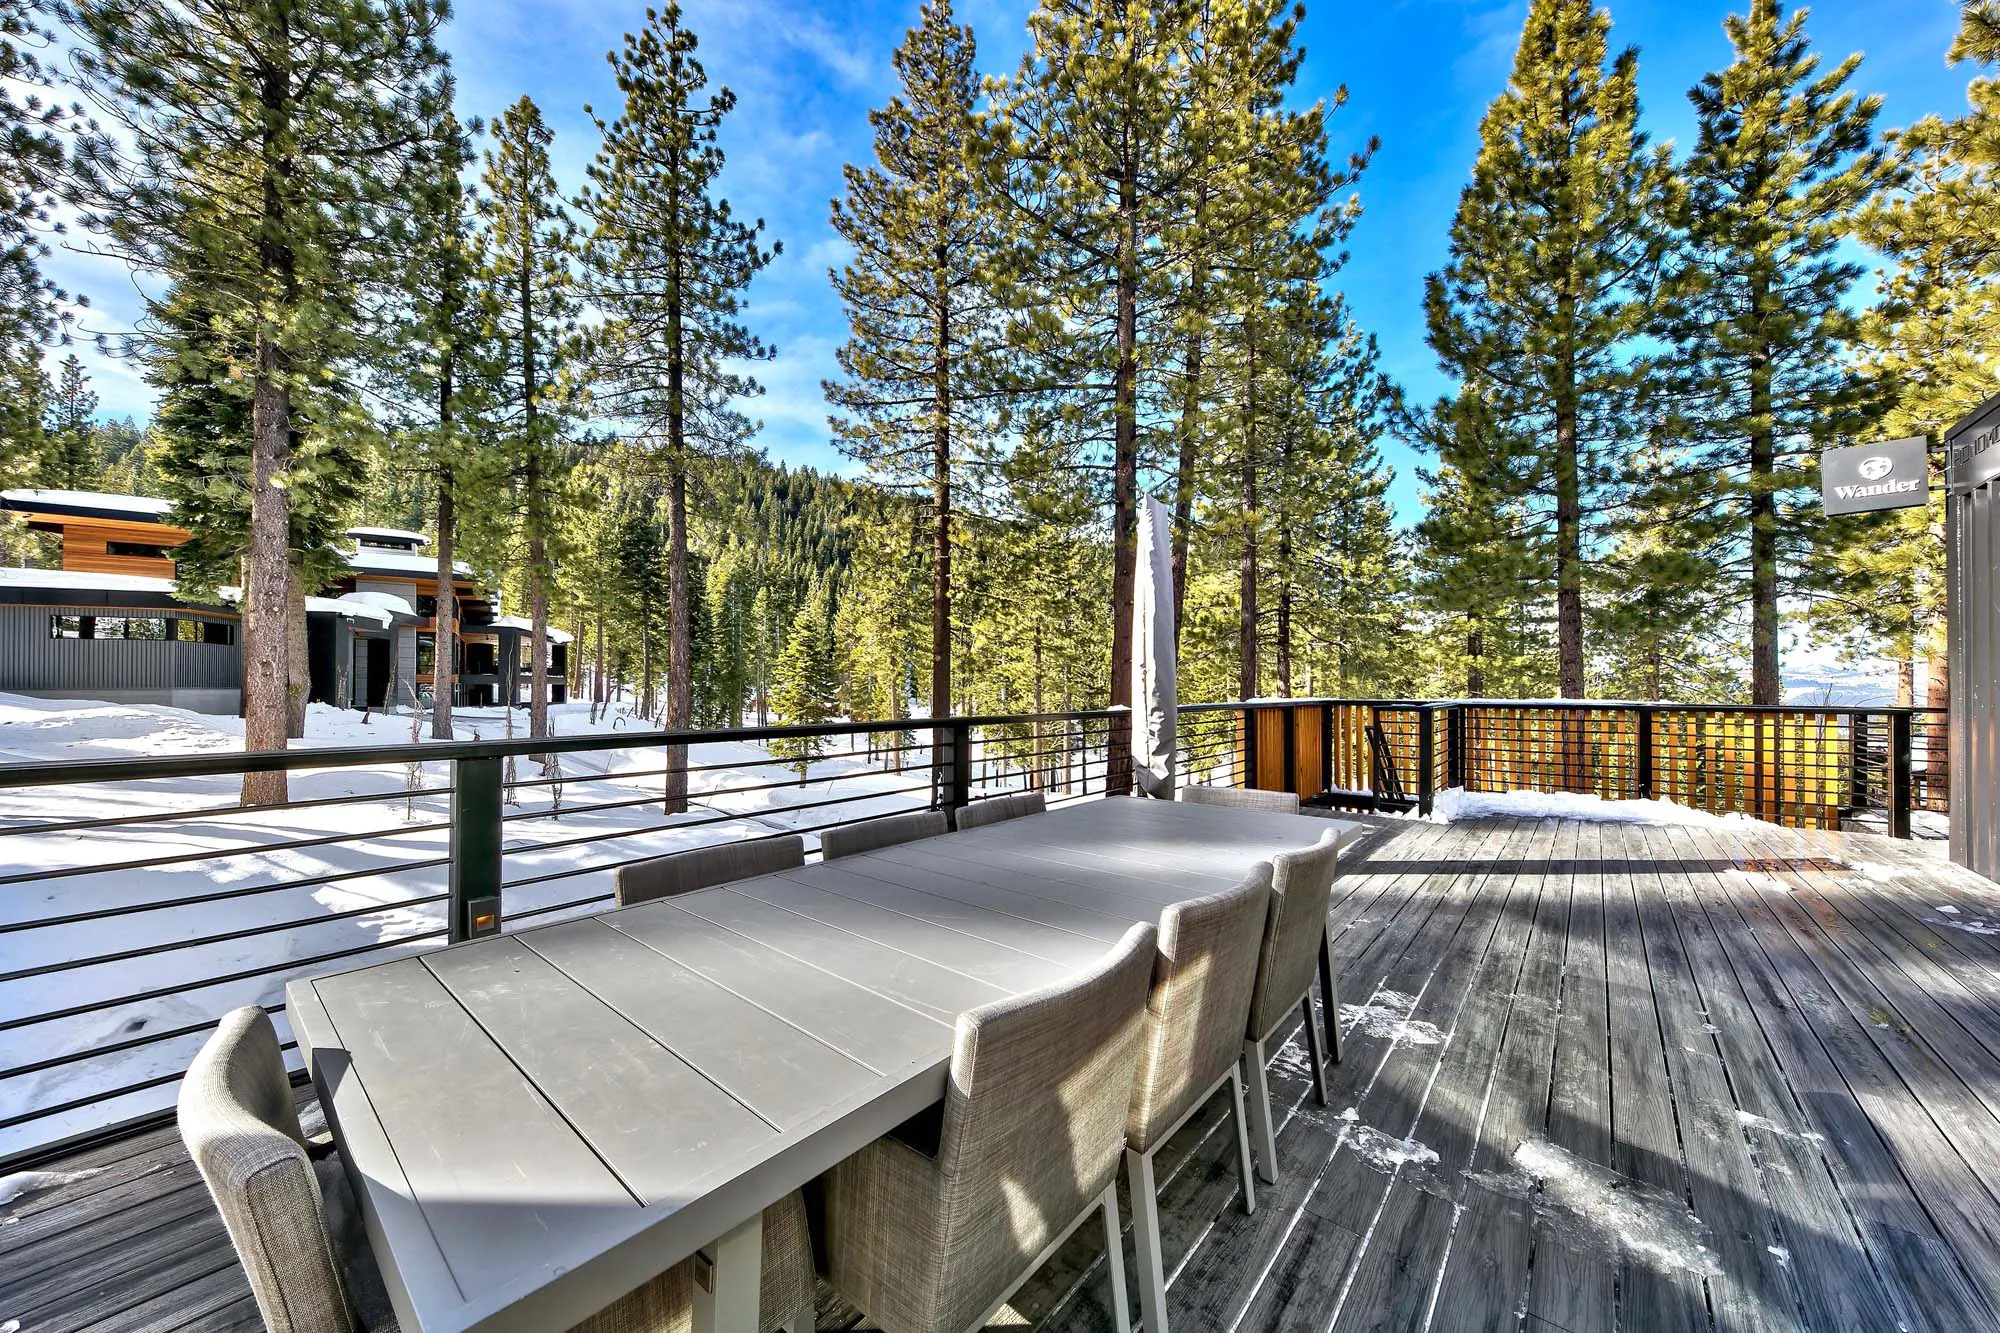 The best way to spend your winter vacation: A luxury mountain escape in Tahoe! – Presented by Wander Tahoe Slopes